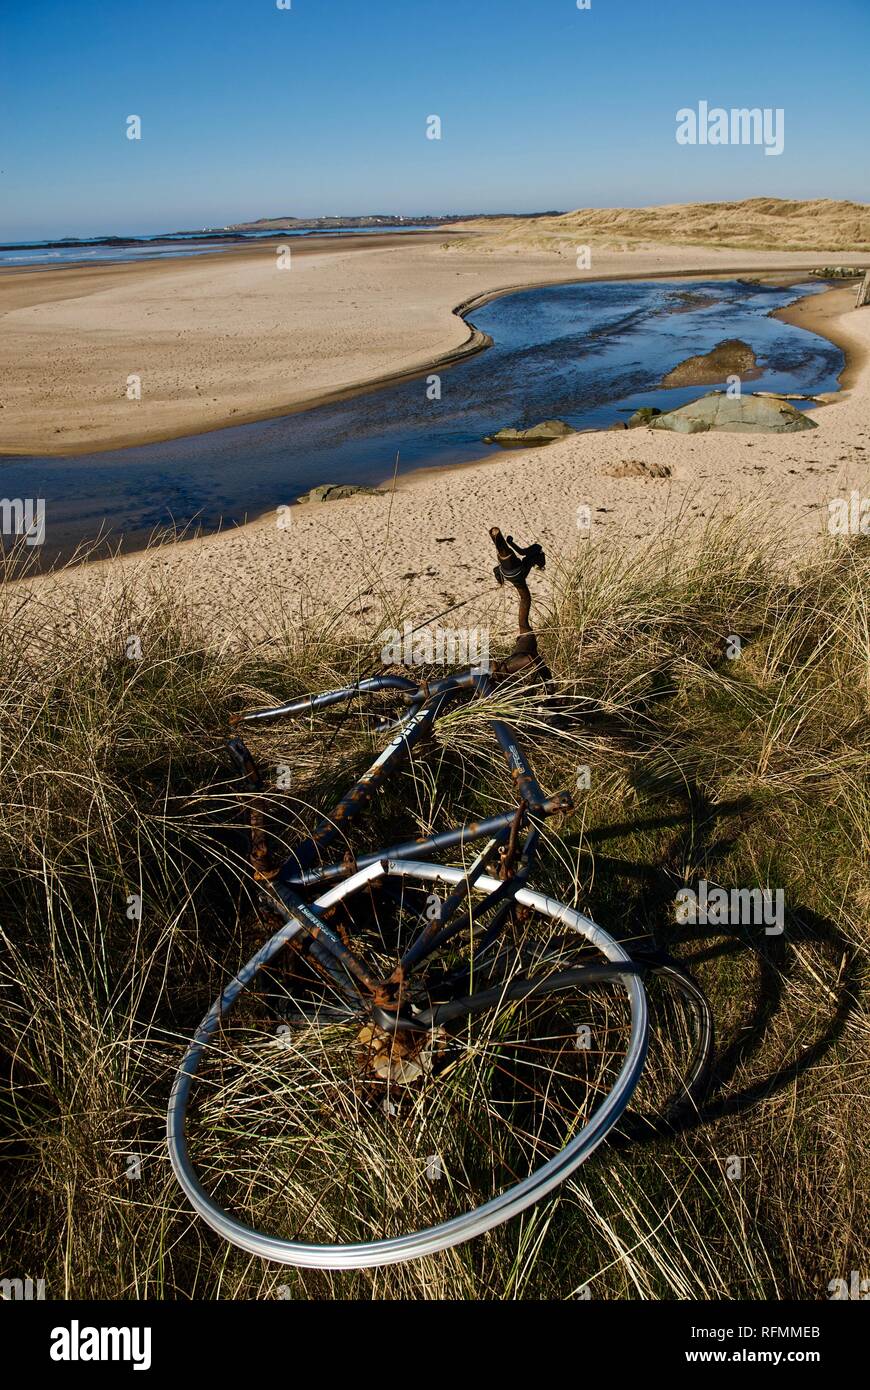 A broken bicycle discarded on a beautiful sandy beach in Rhosneigr, Anglesey, North Wales, UK Stock Photo